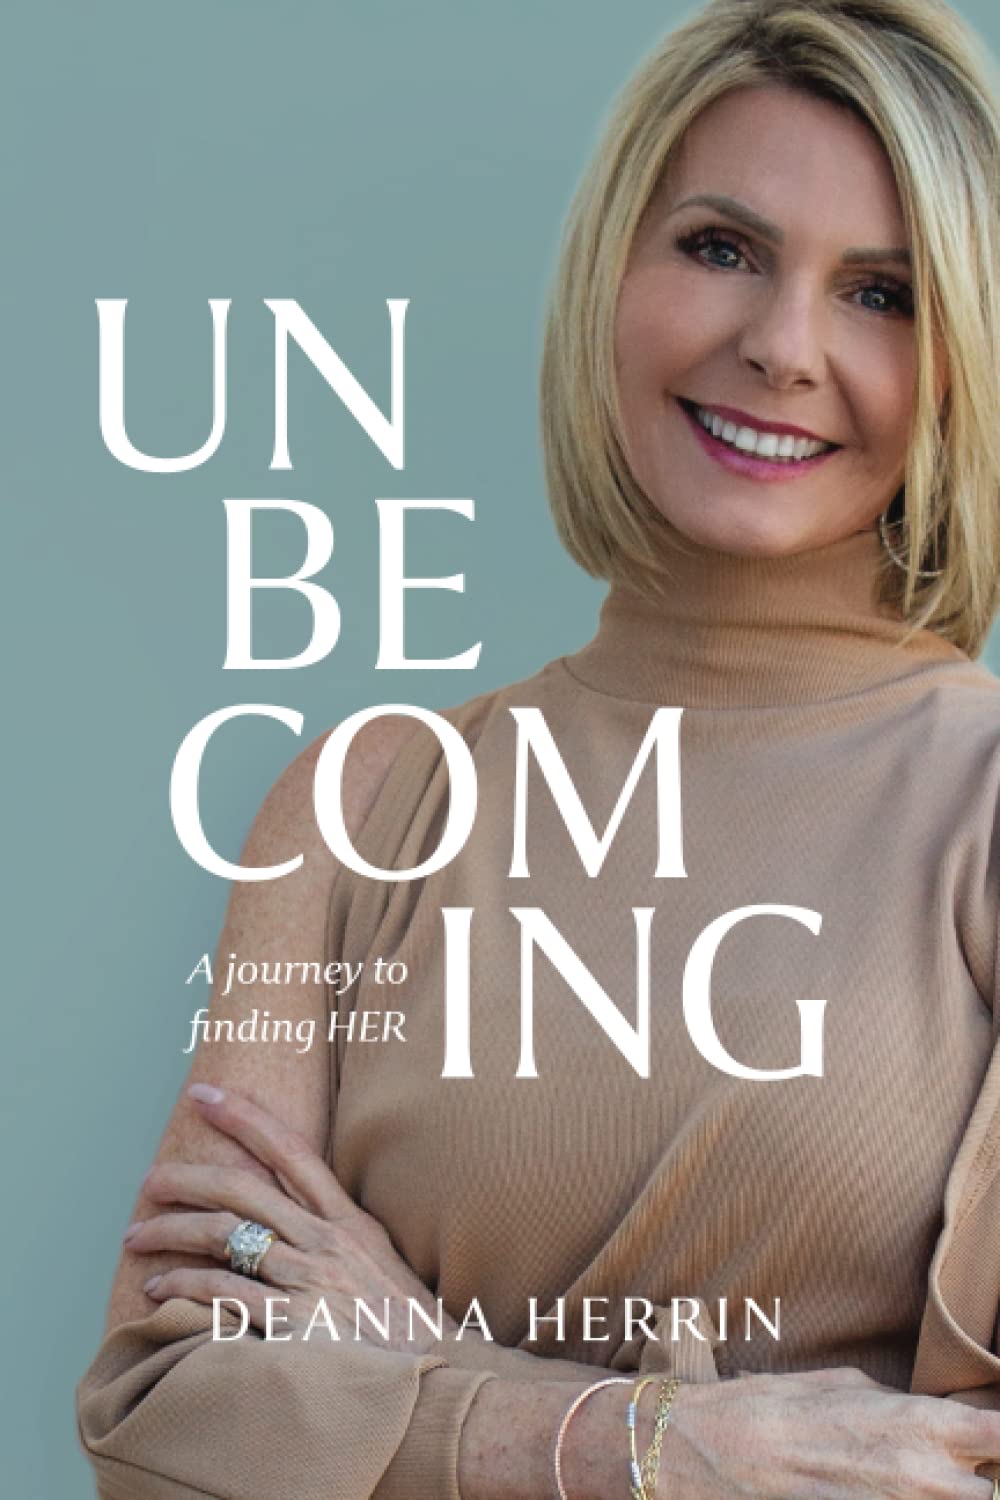 Deanna Herrin Unbecoming a Journey to finding Her Book